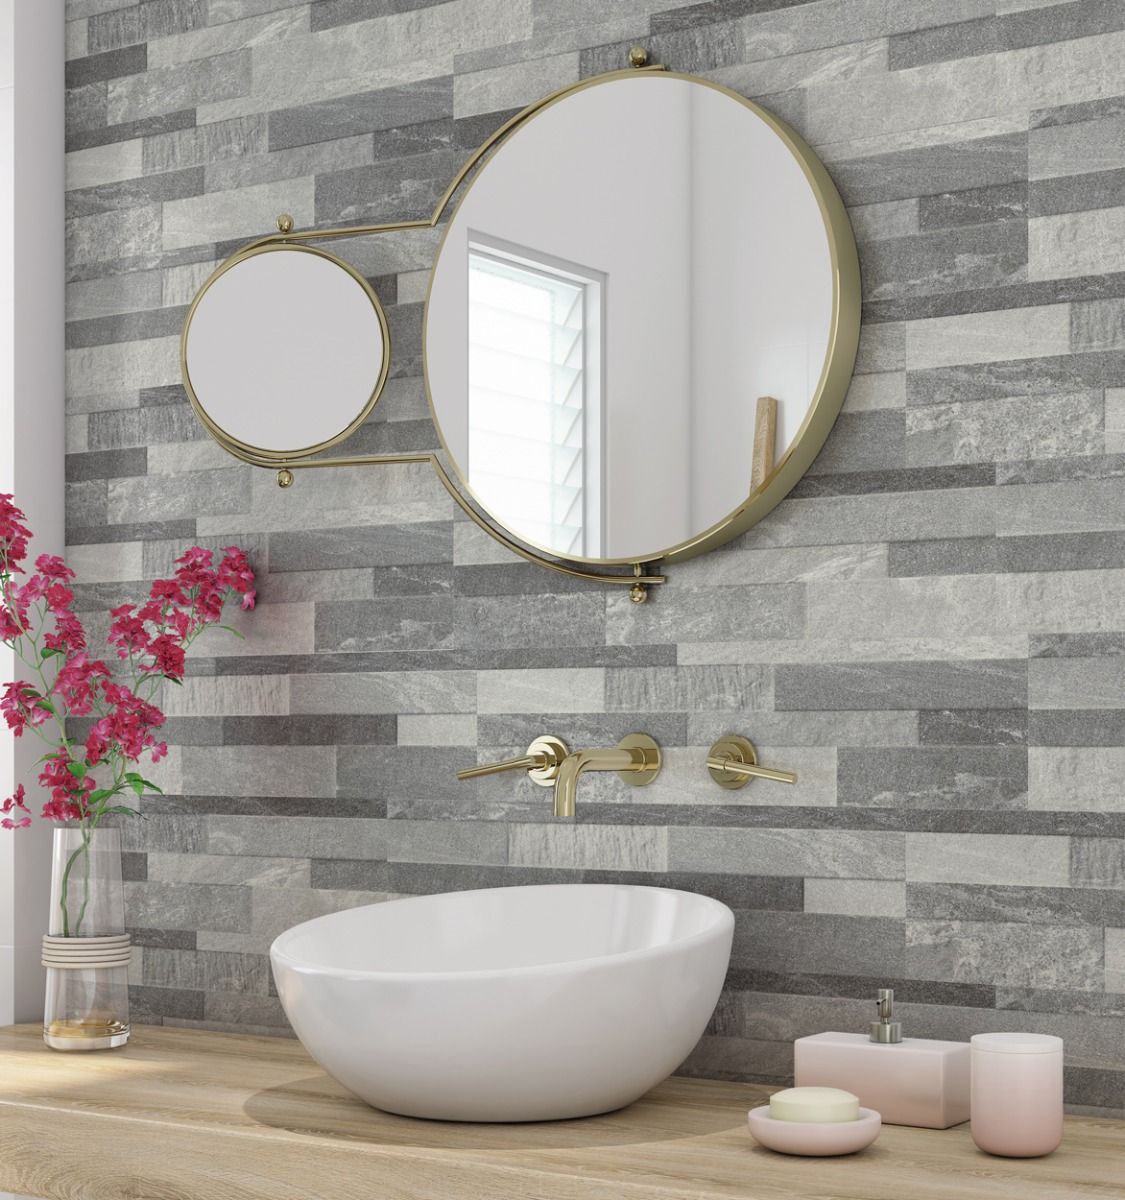 Cosmos Split Face Effect Tile - Click to view